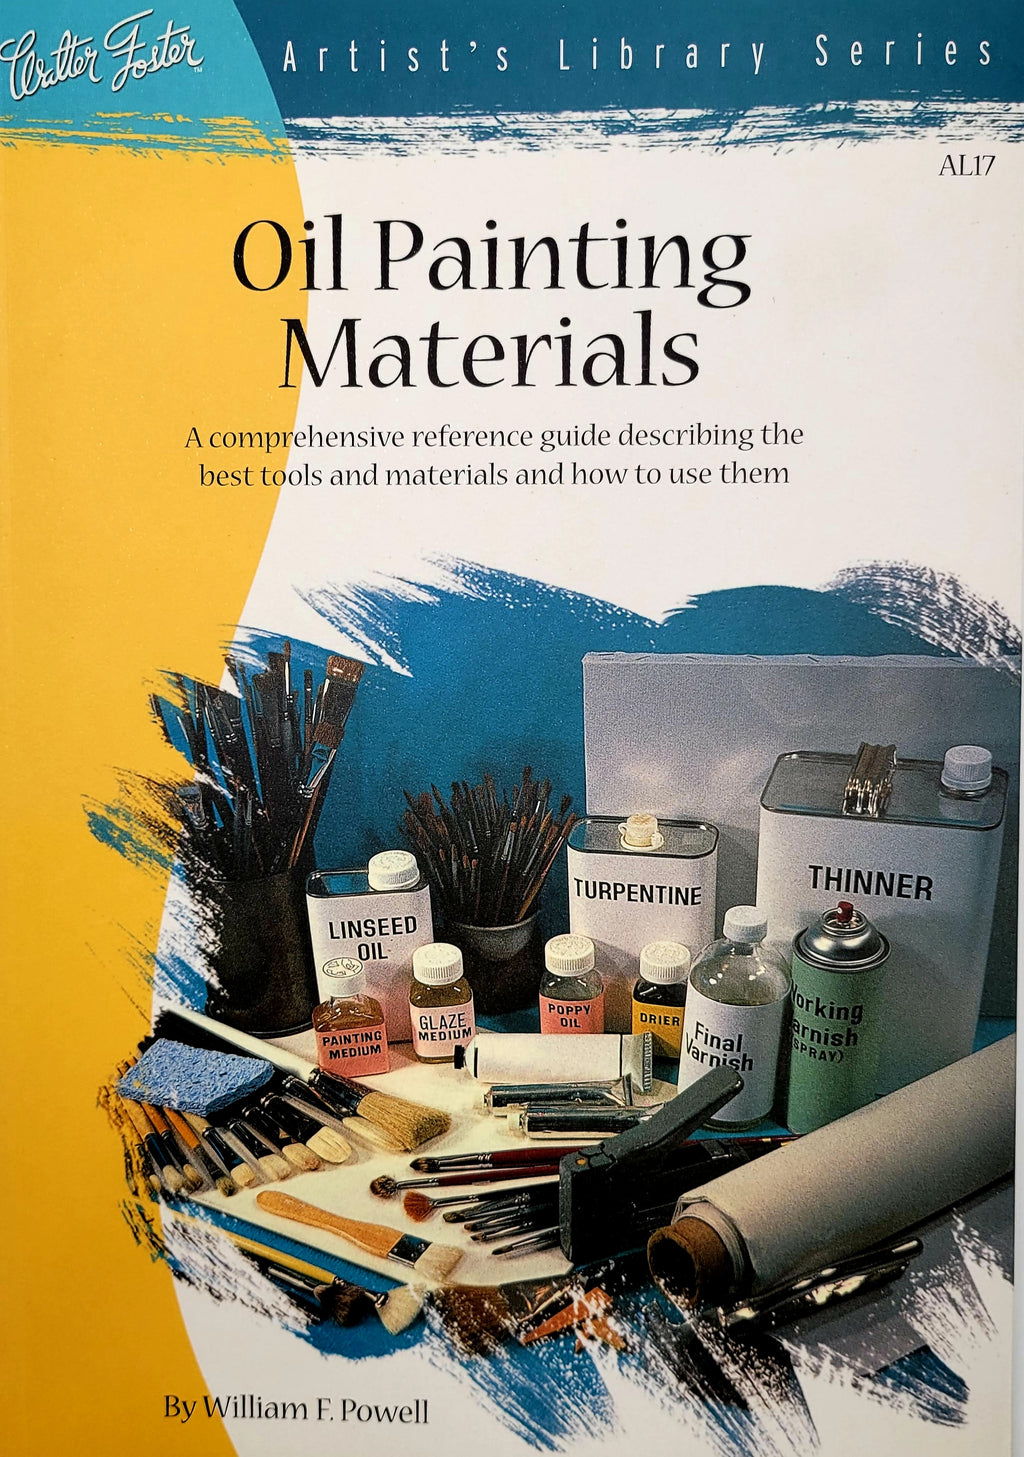 Oil Painting Materials, Walter Foster Artist's Library Series